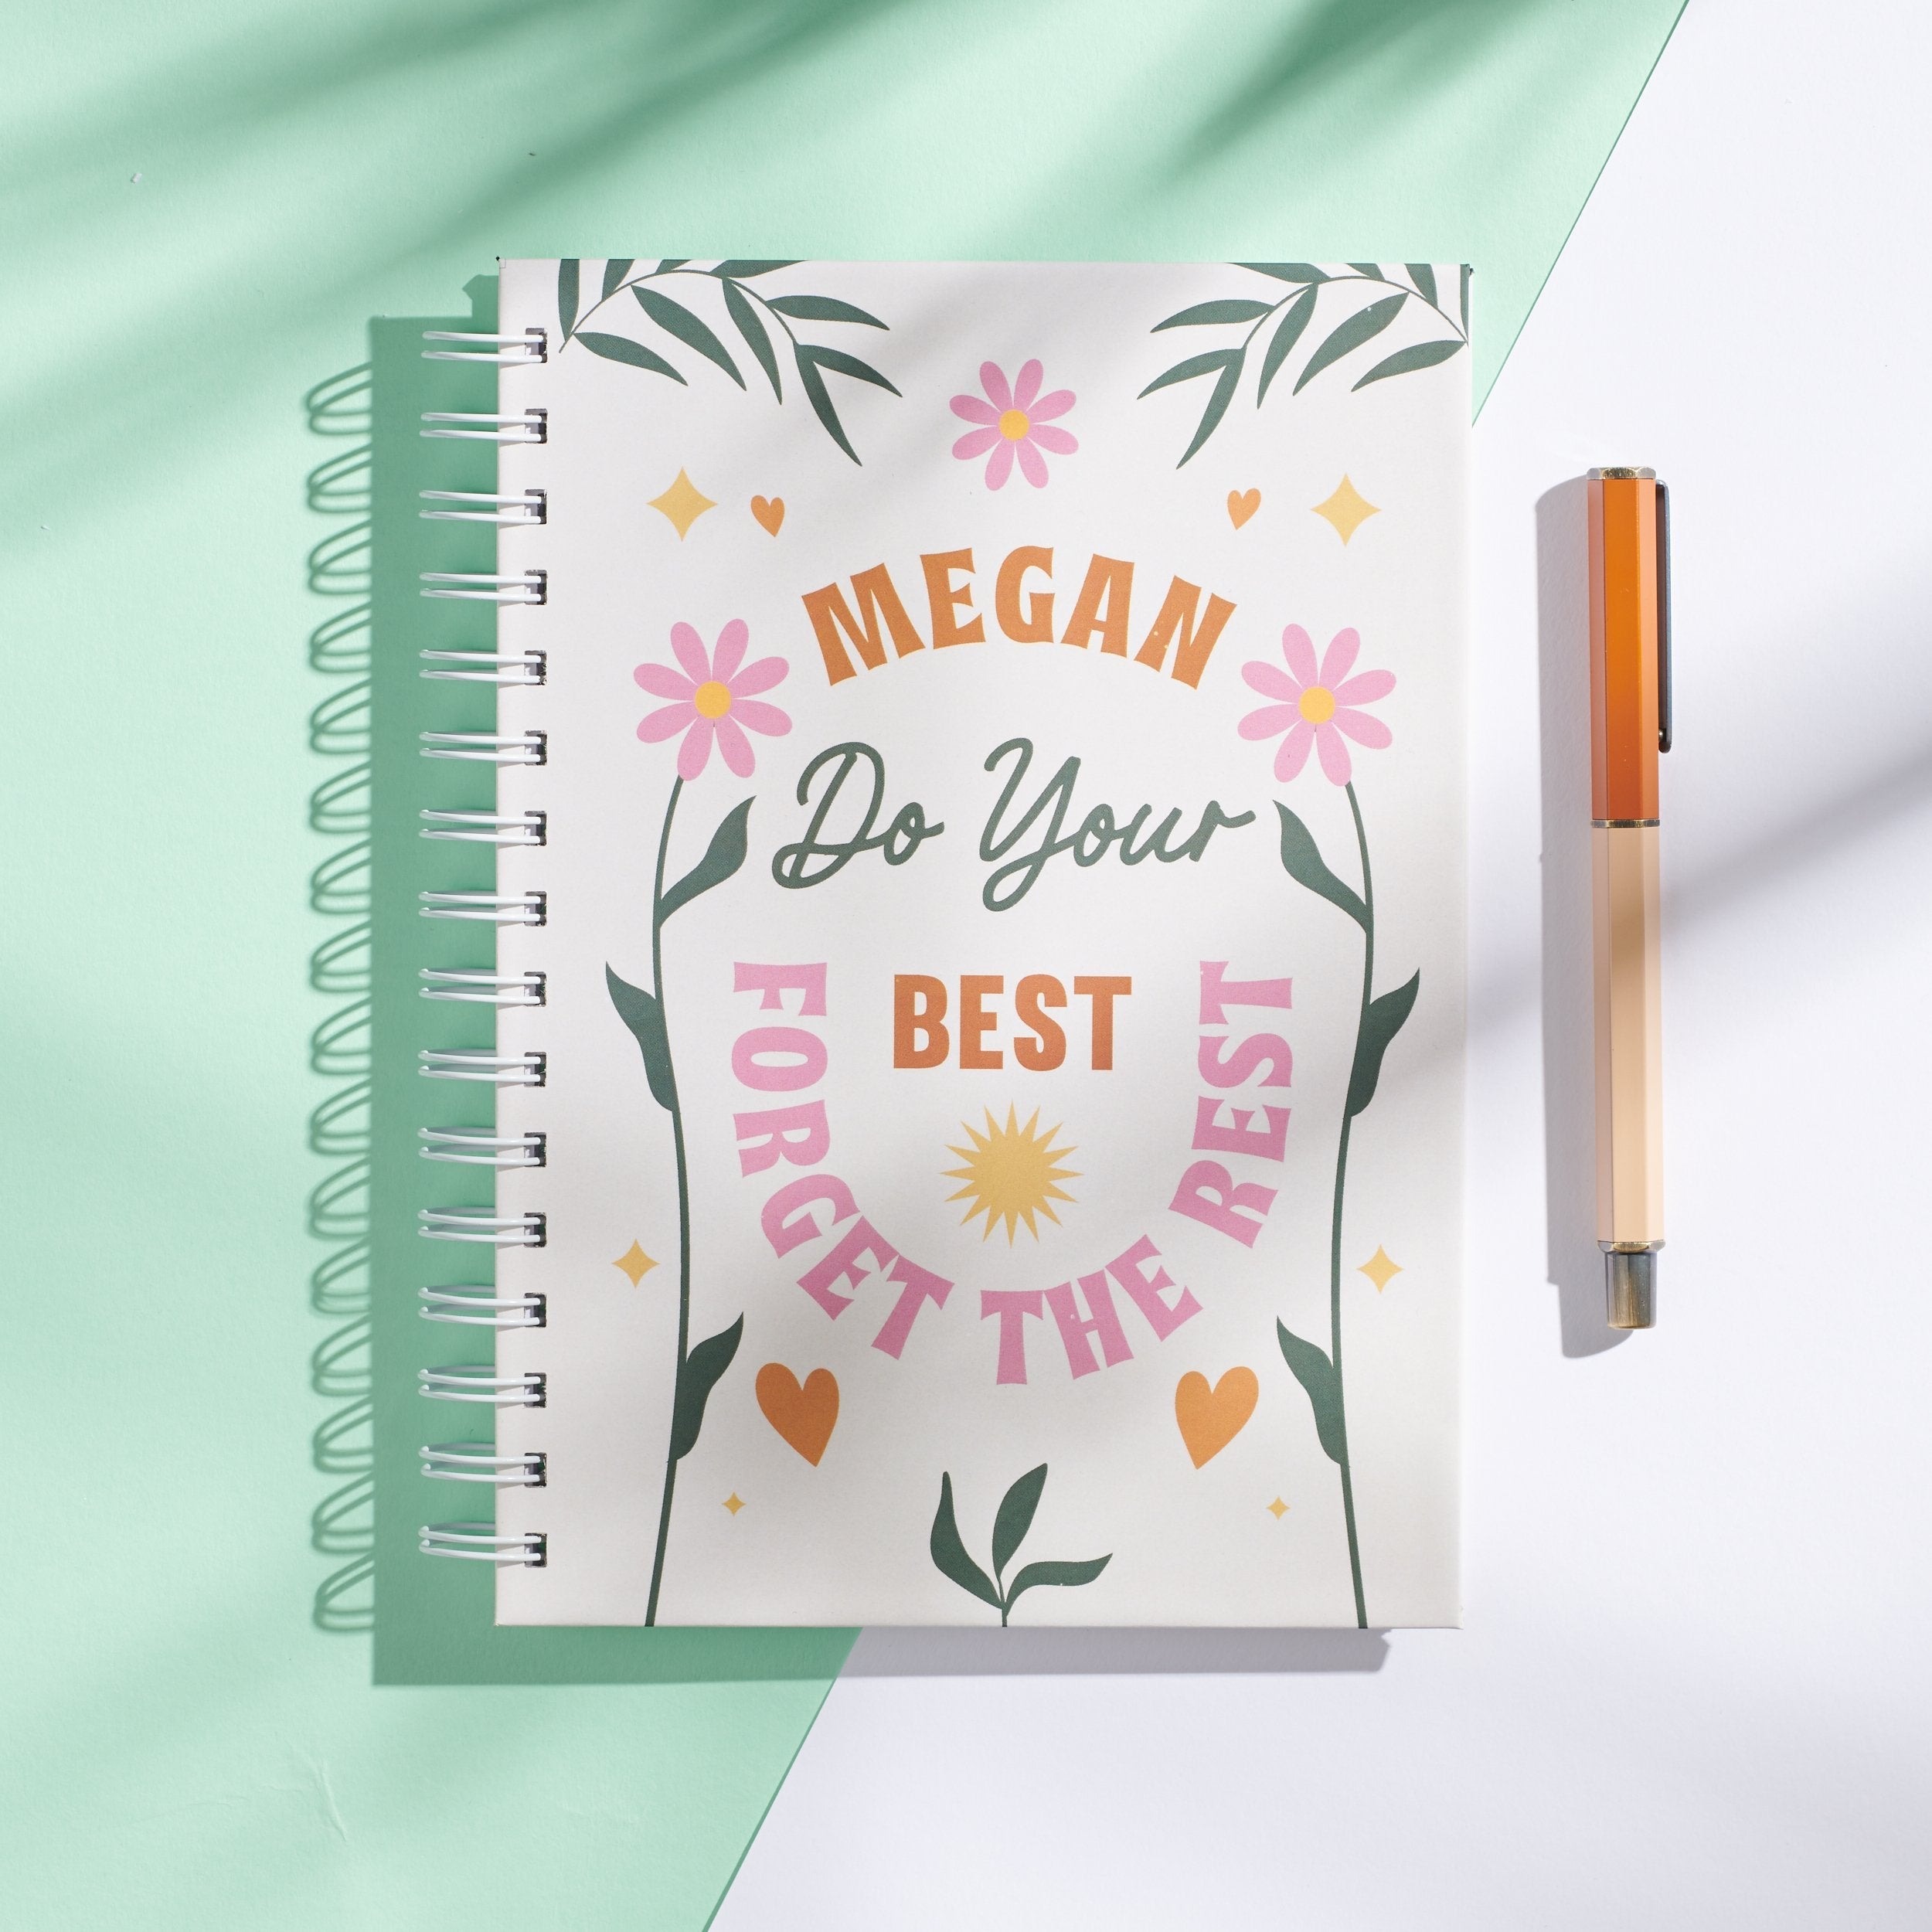 Oakdene Designs Notebooks Personalised Positive 'Do Your Best' Notebook